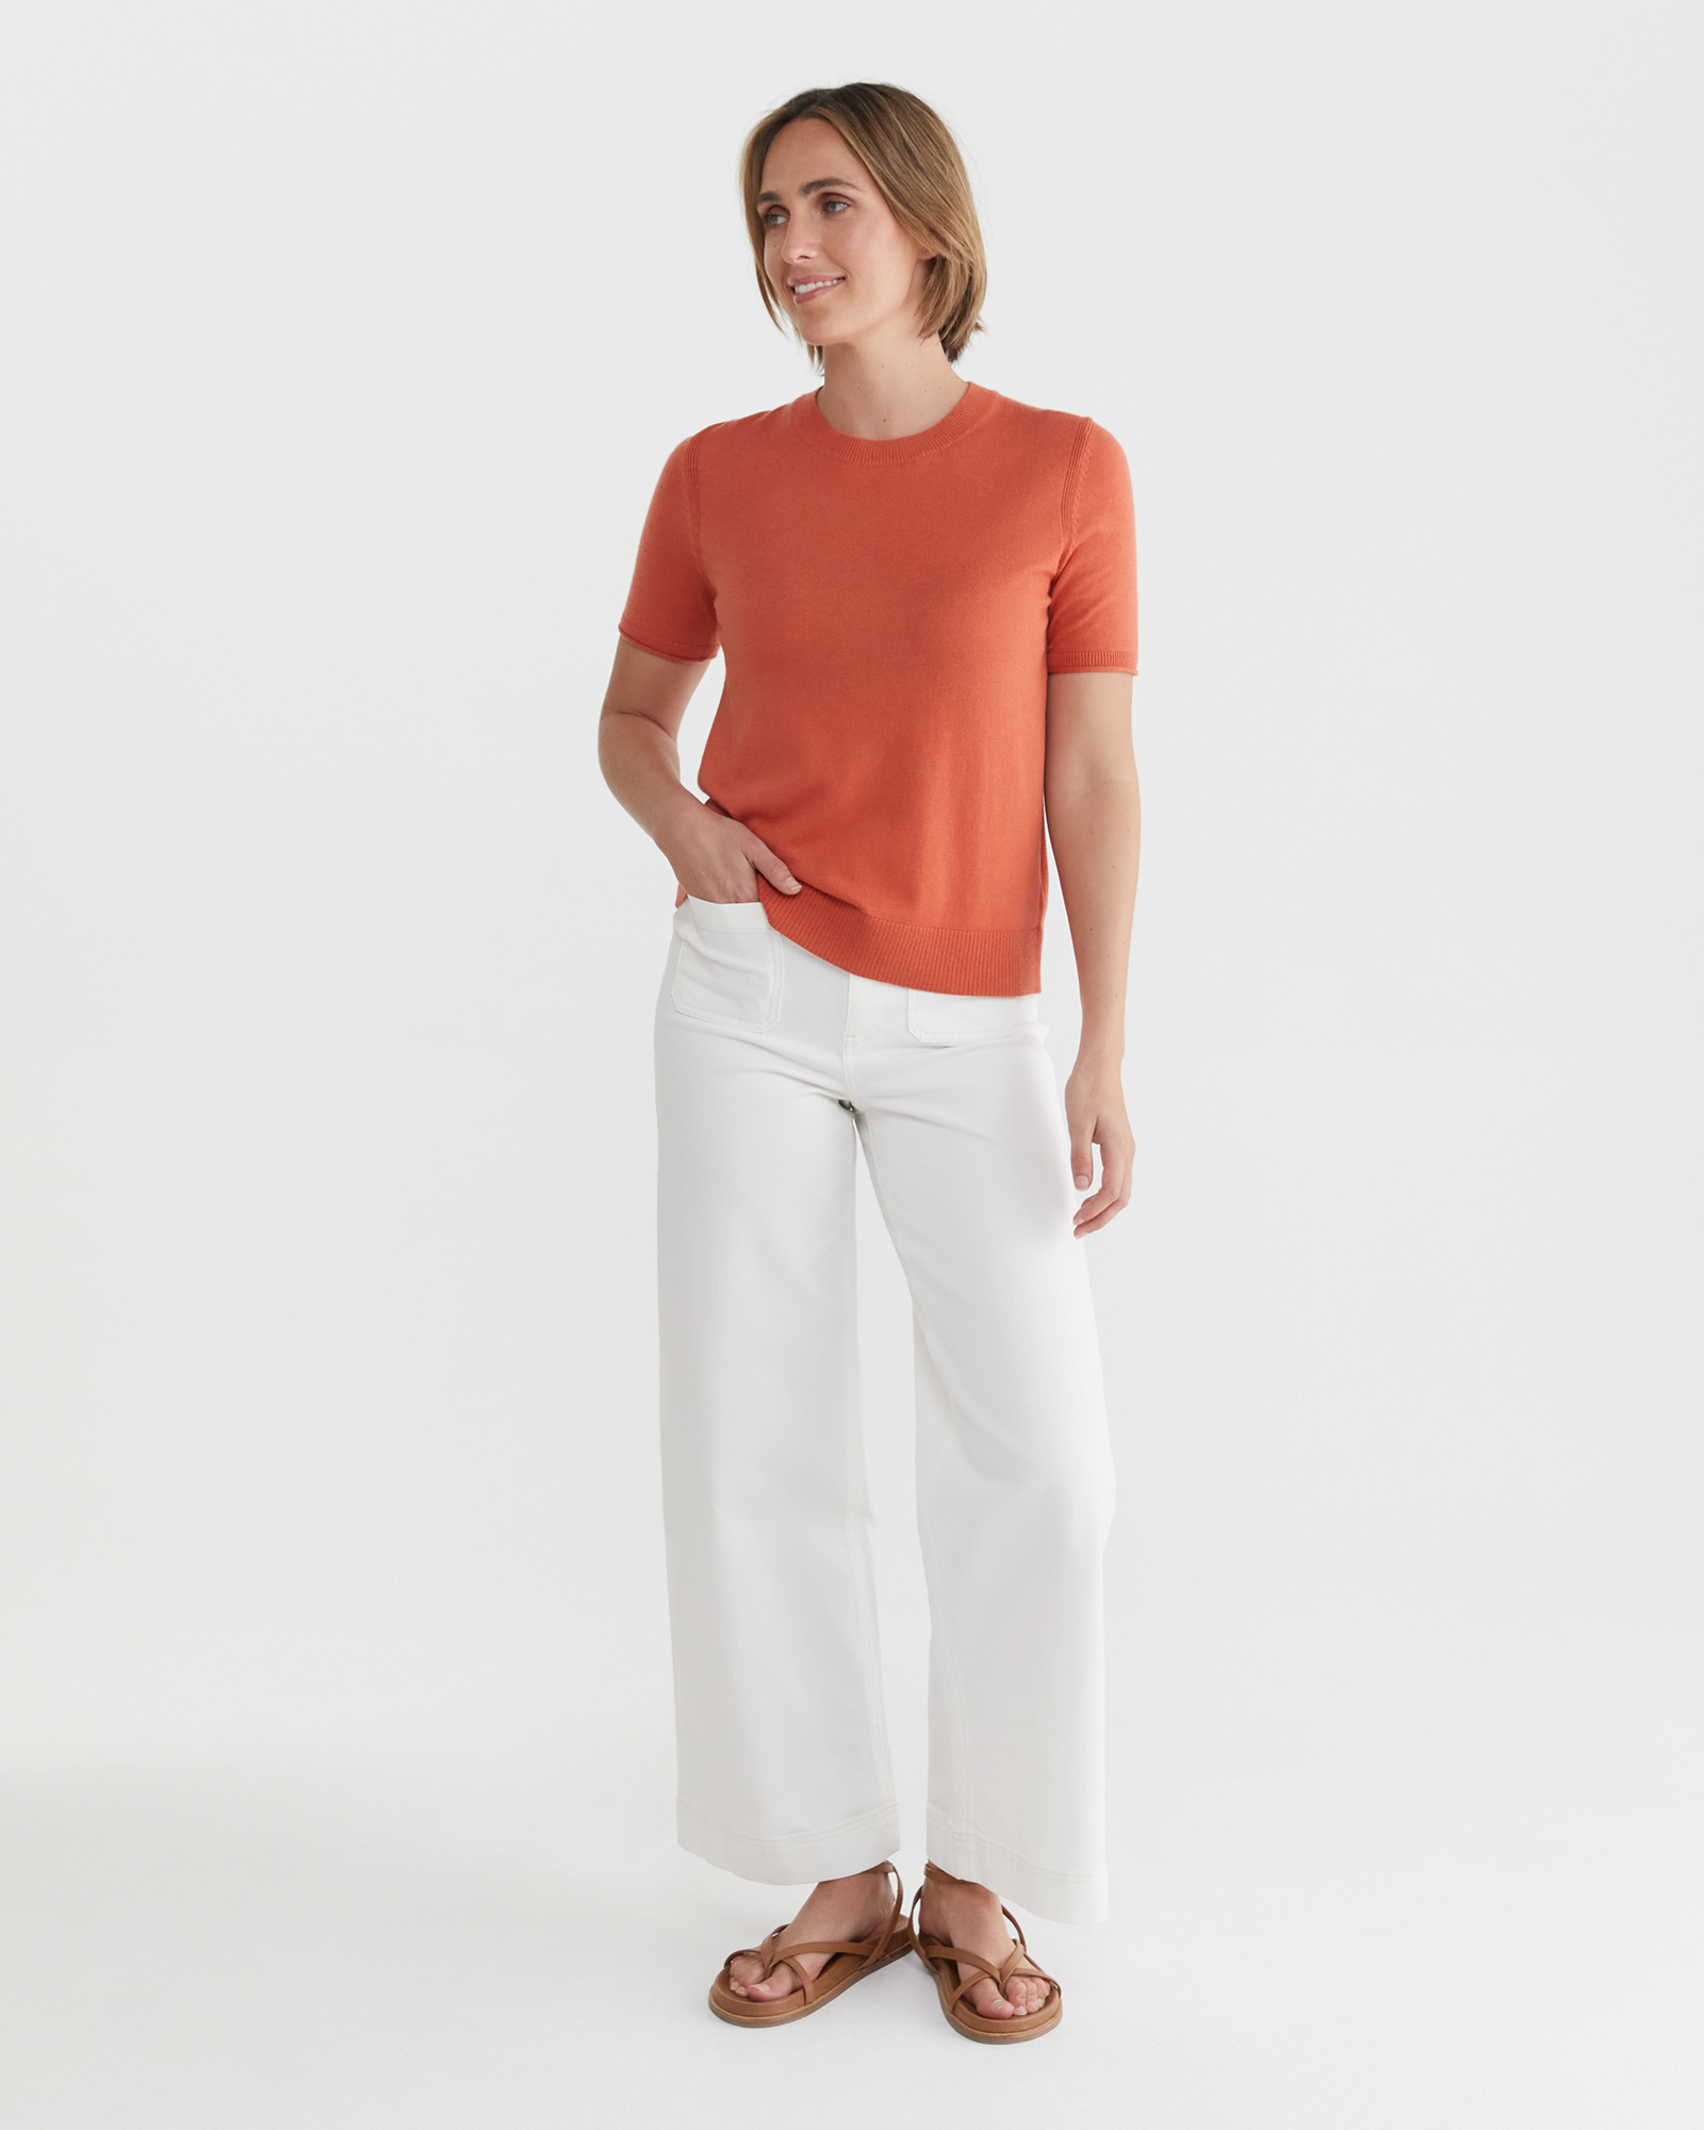 Laurina Knit Tee in TERRACOTTA